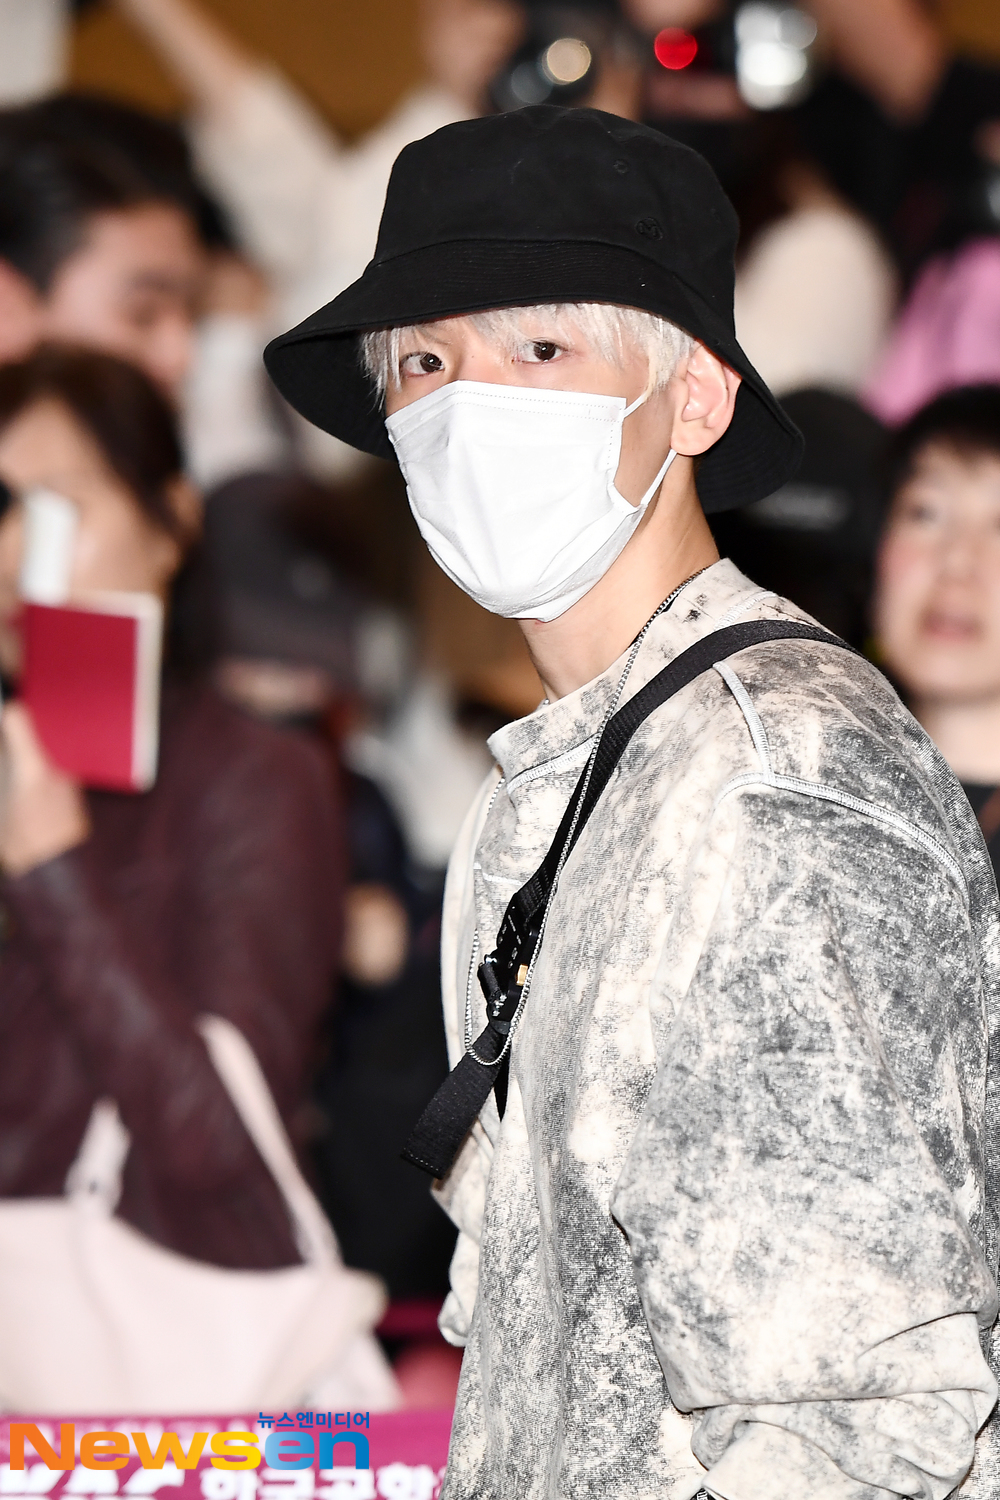 <p>EXO(EXO) member, guardian, Chanyeol, Kai, Baekhyun, Sehun, Chen 10 November 17 Afternoon Seoul Gangseo way car Gimpo International Airport through the ‘EXO PLANET #5 - EXplOration - In Japan’ schedule to attend car Japan Osaka University the country had.</p><p>EXO(EXO) member Baekhyun this Japan Osaka University the country has.</p>